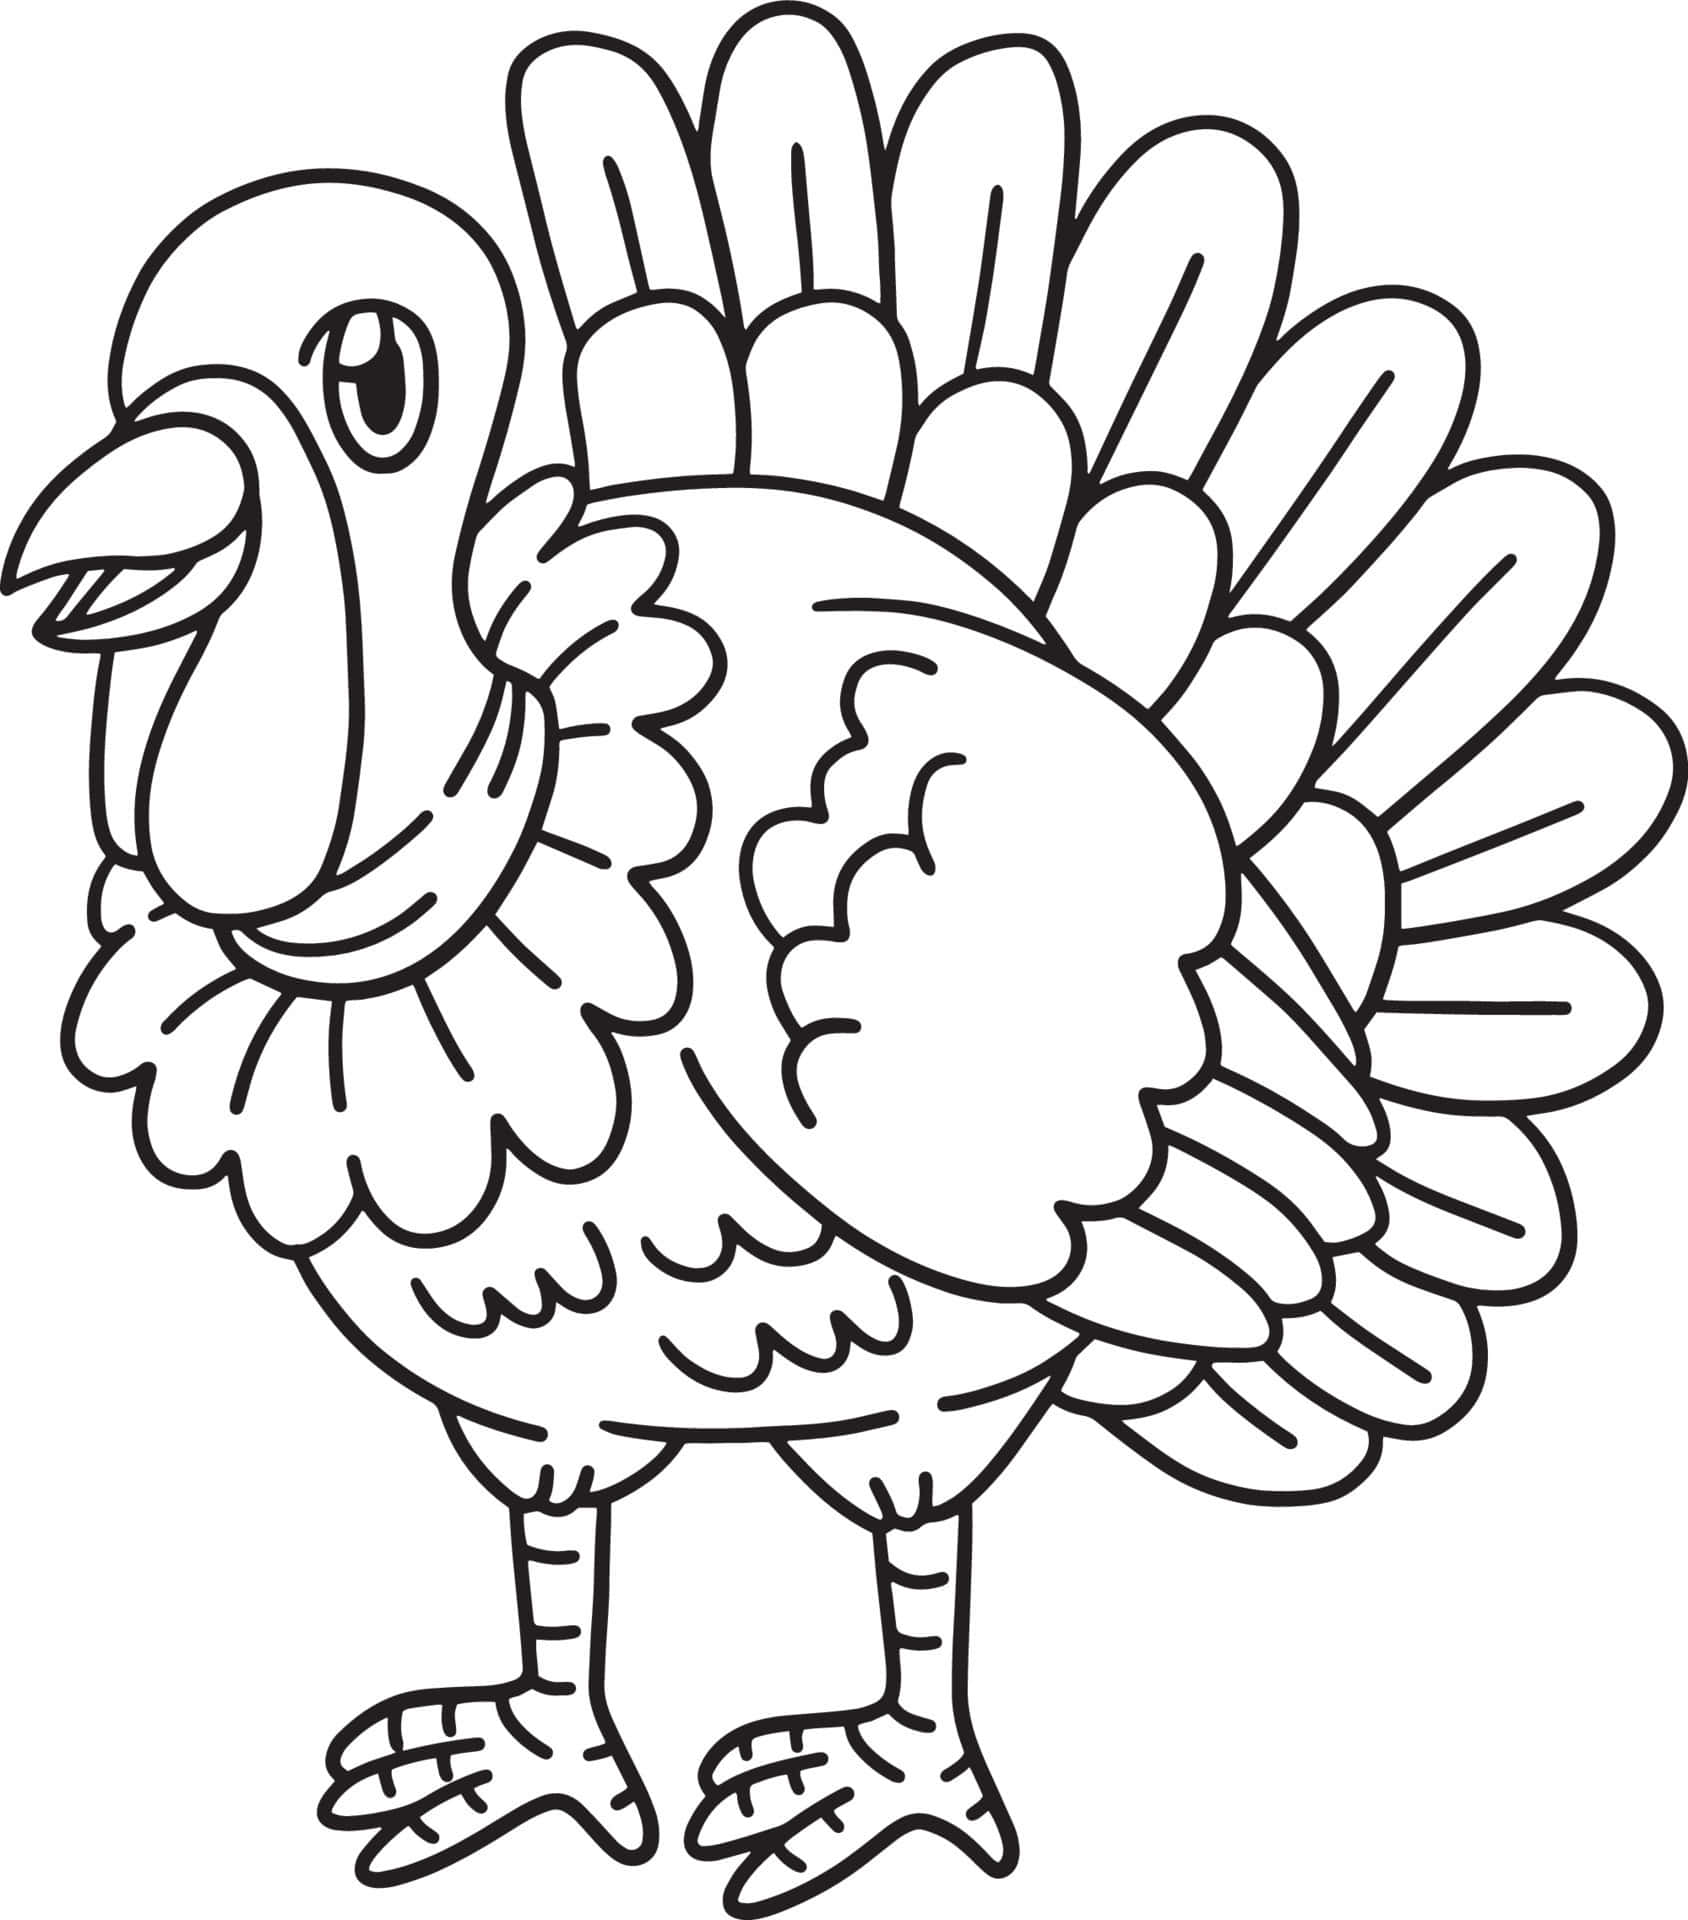 Download Turkey Coloring Pictures 1688 x 1920 | Wallpapers.com